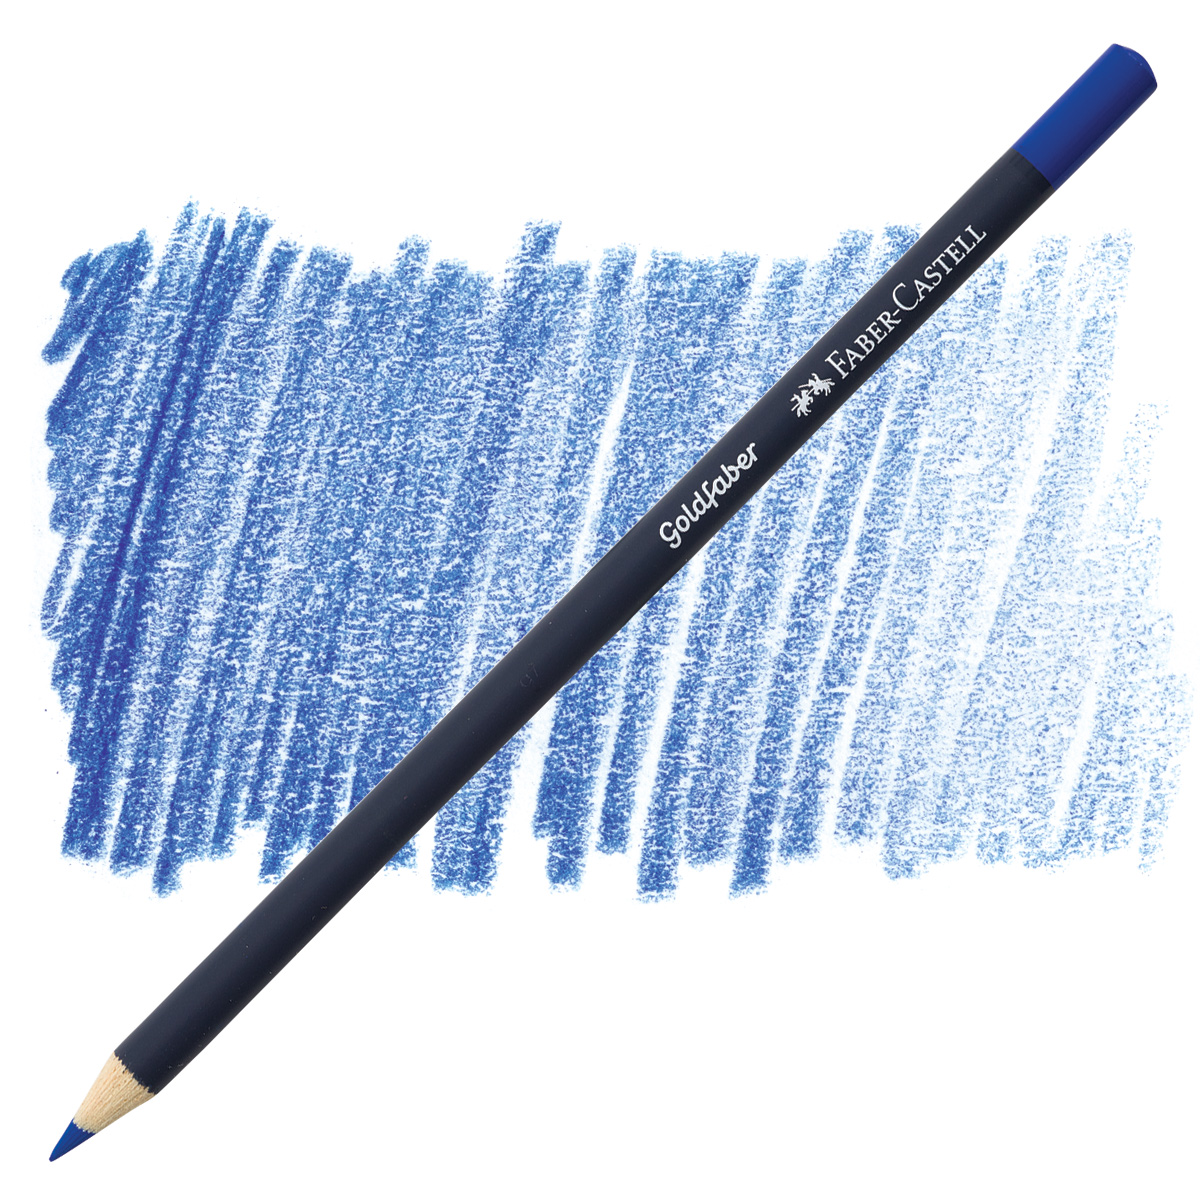 Faber Castell Goldfaber Colored Pencils Review - Best Colored Pencils -  Reviews and Picks